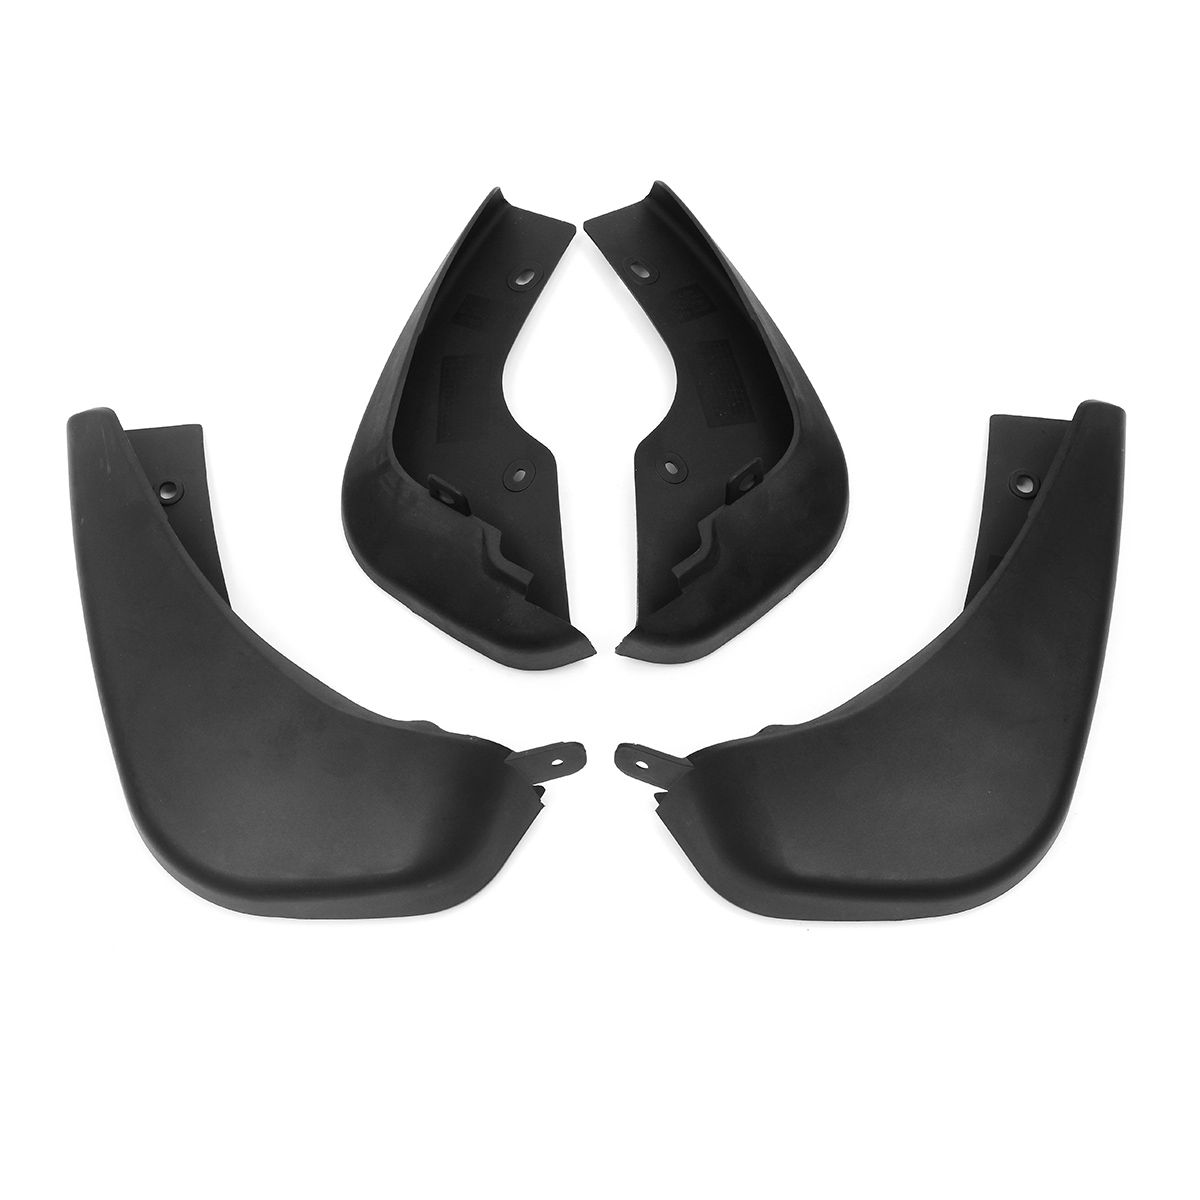 Front-Rear-Car-Mudguards-Flaps-For-Nissan-Juke-2010-2014-F15-1394419